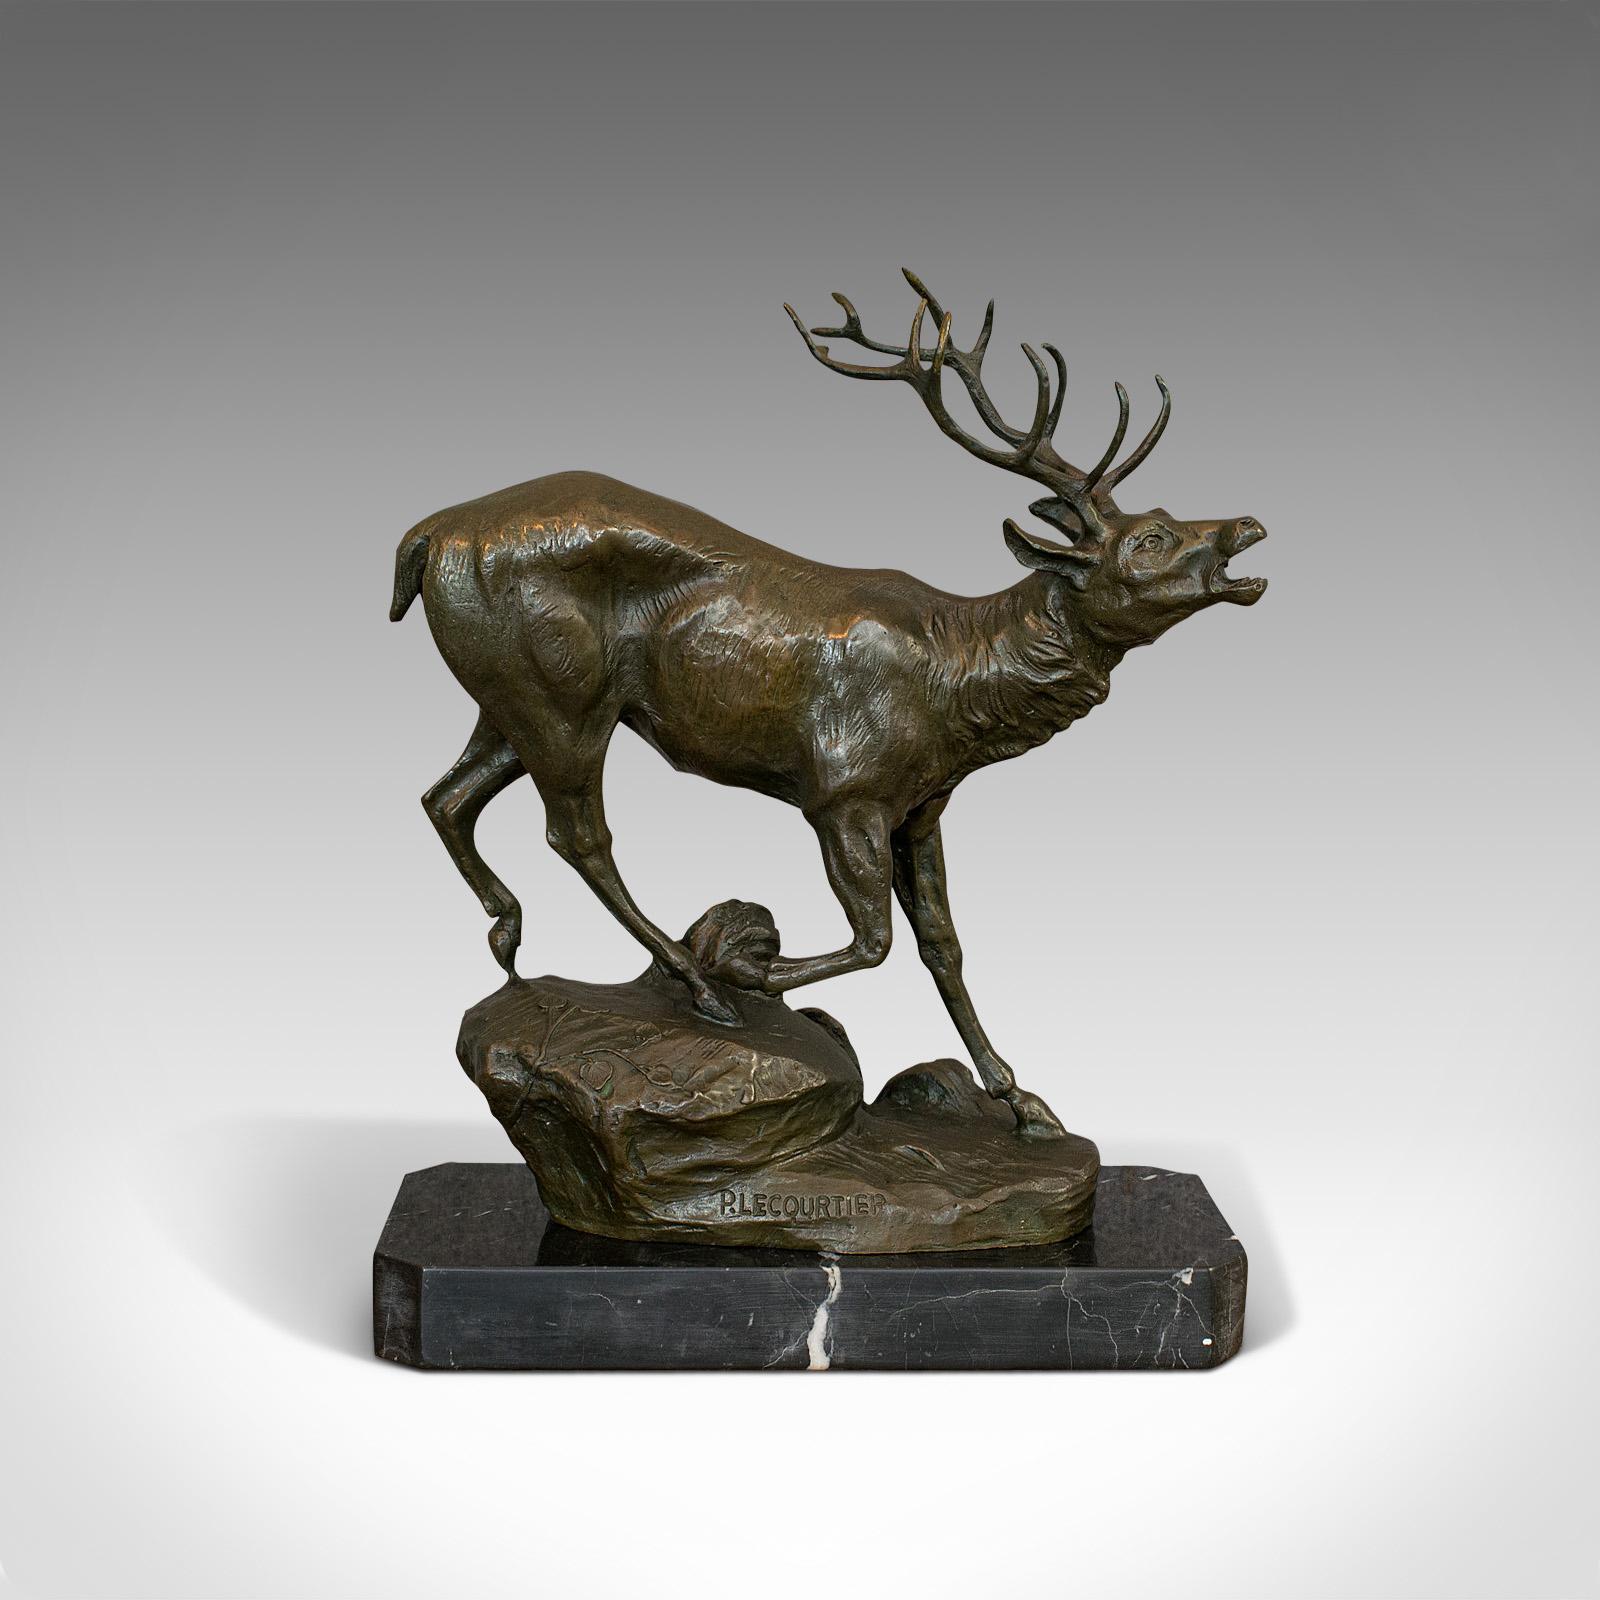 This is an antique stag bronze. A French, study of a deer or male elk and signed by the artist Prosper Lecourtier (1851-1924), dating to the late Victorian period, circa 1900.

Fascinating natural study in bronze
Displaying a desirable aged